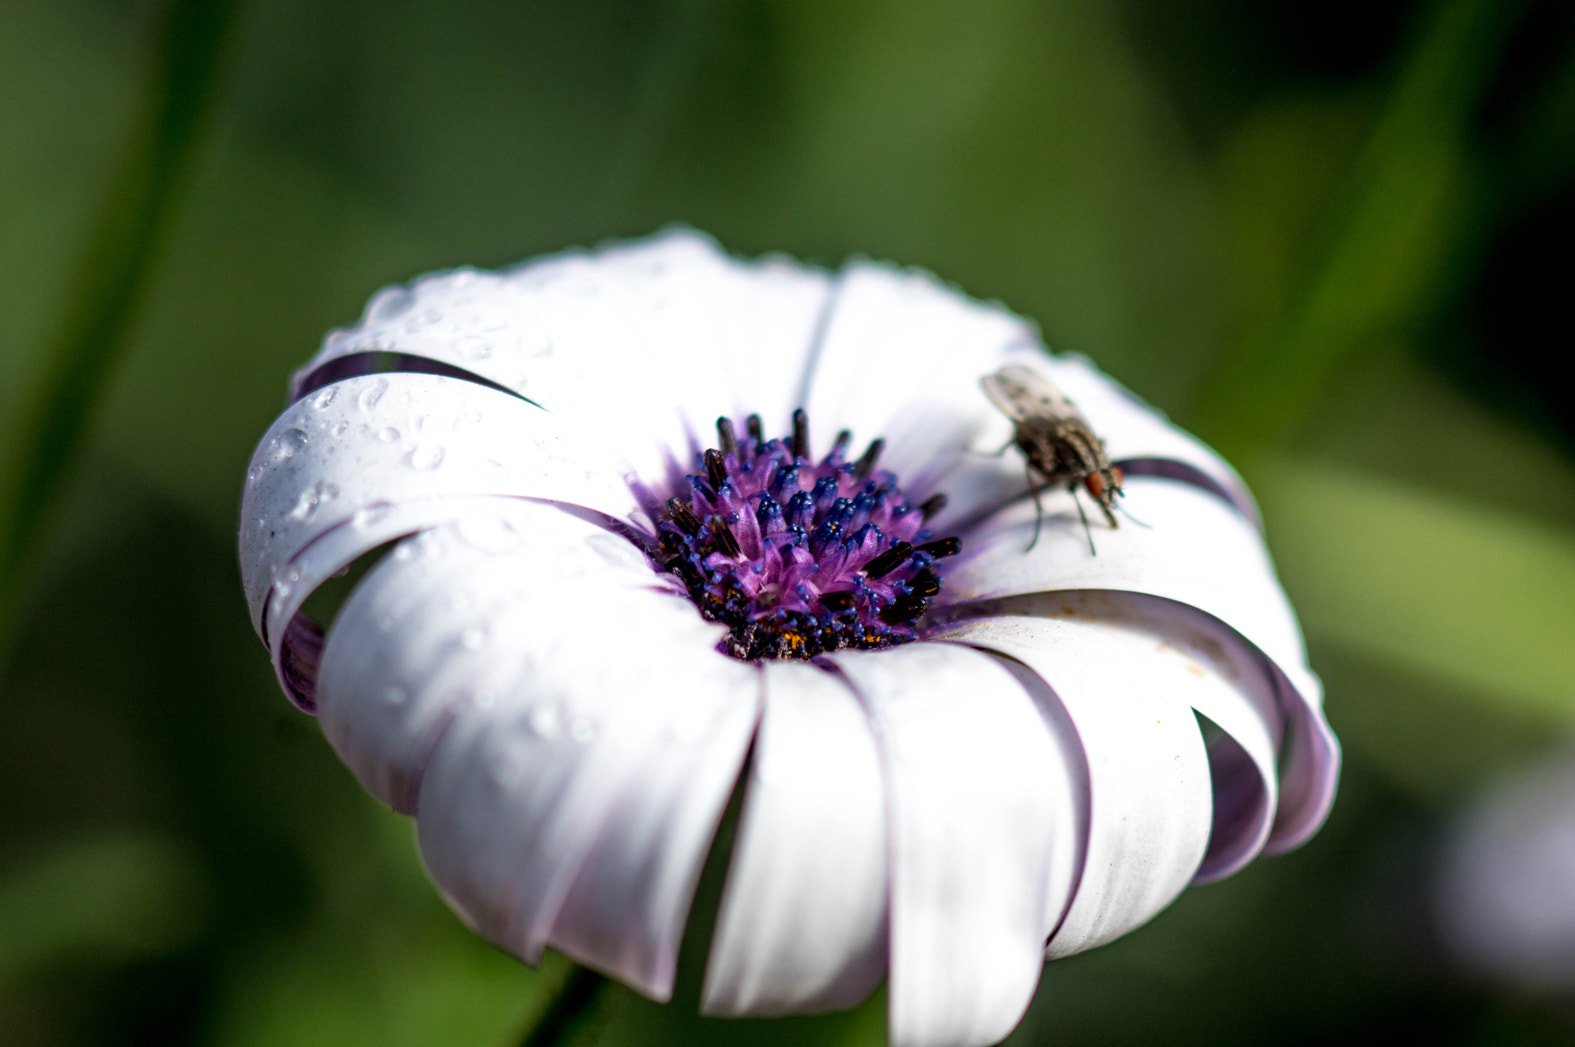 Pentax K-3 sample photo. Blurry fly photography